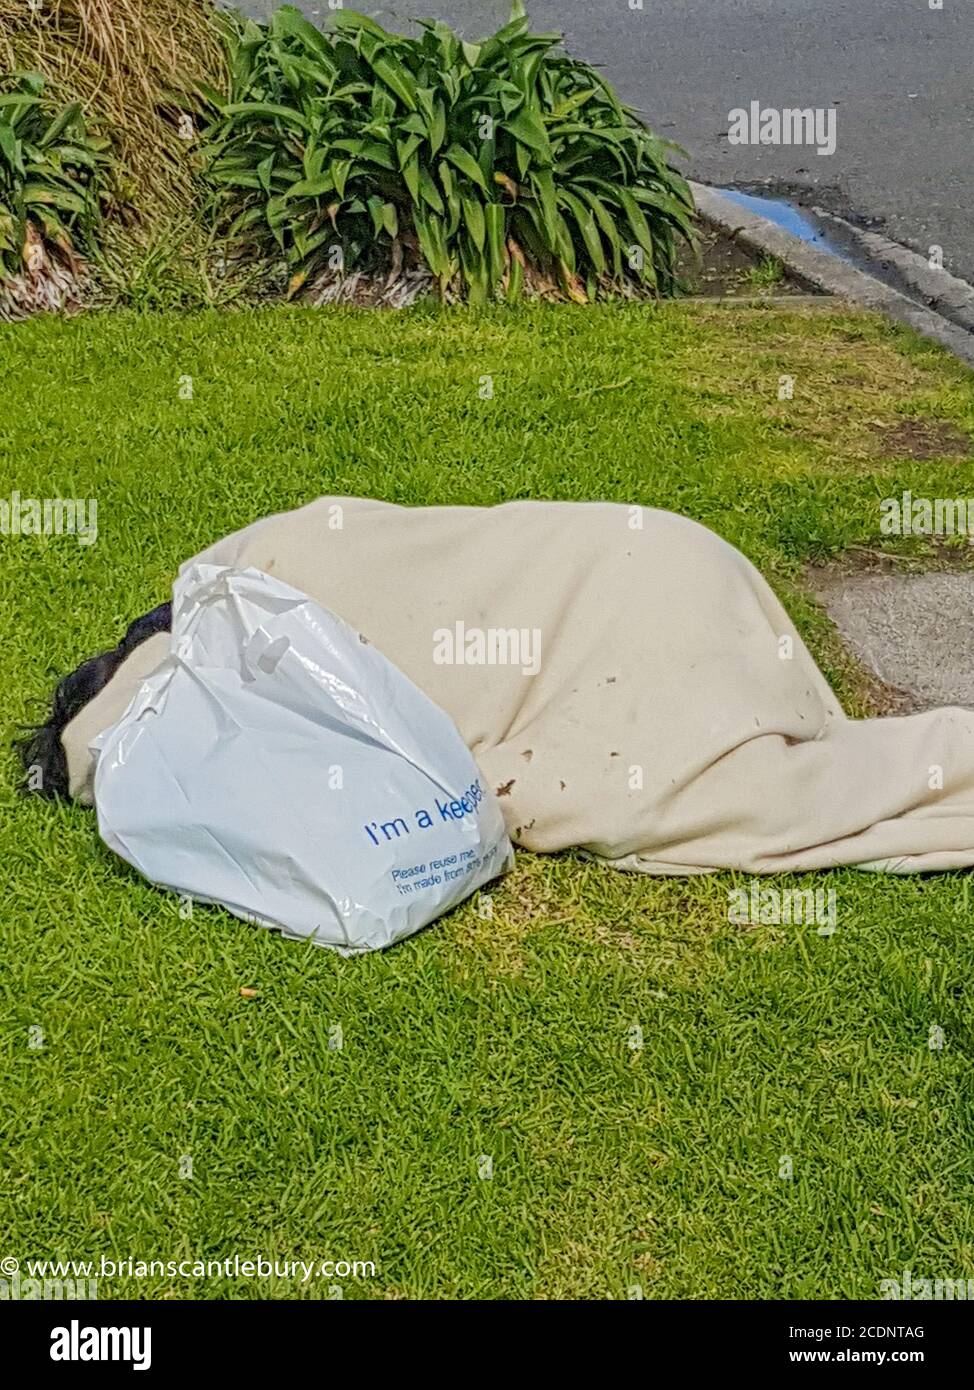 Tauranga New Zealand - August 29 2020; Homeless person asleep on grass in public area wrapped in cloth with plastic bag with words - I am a keeper. Stock Photo